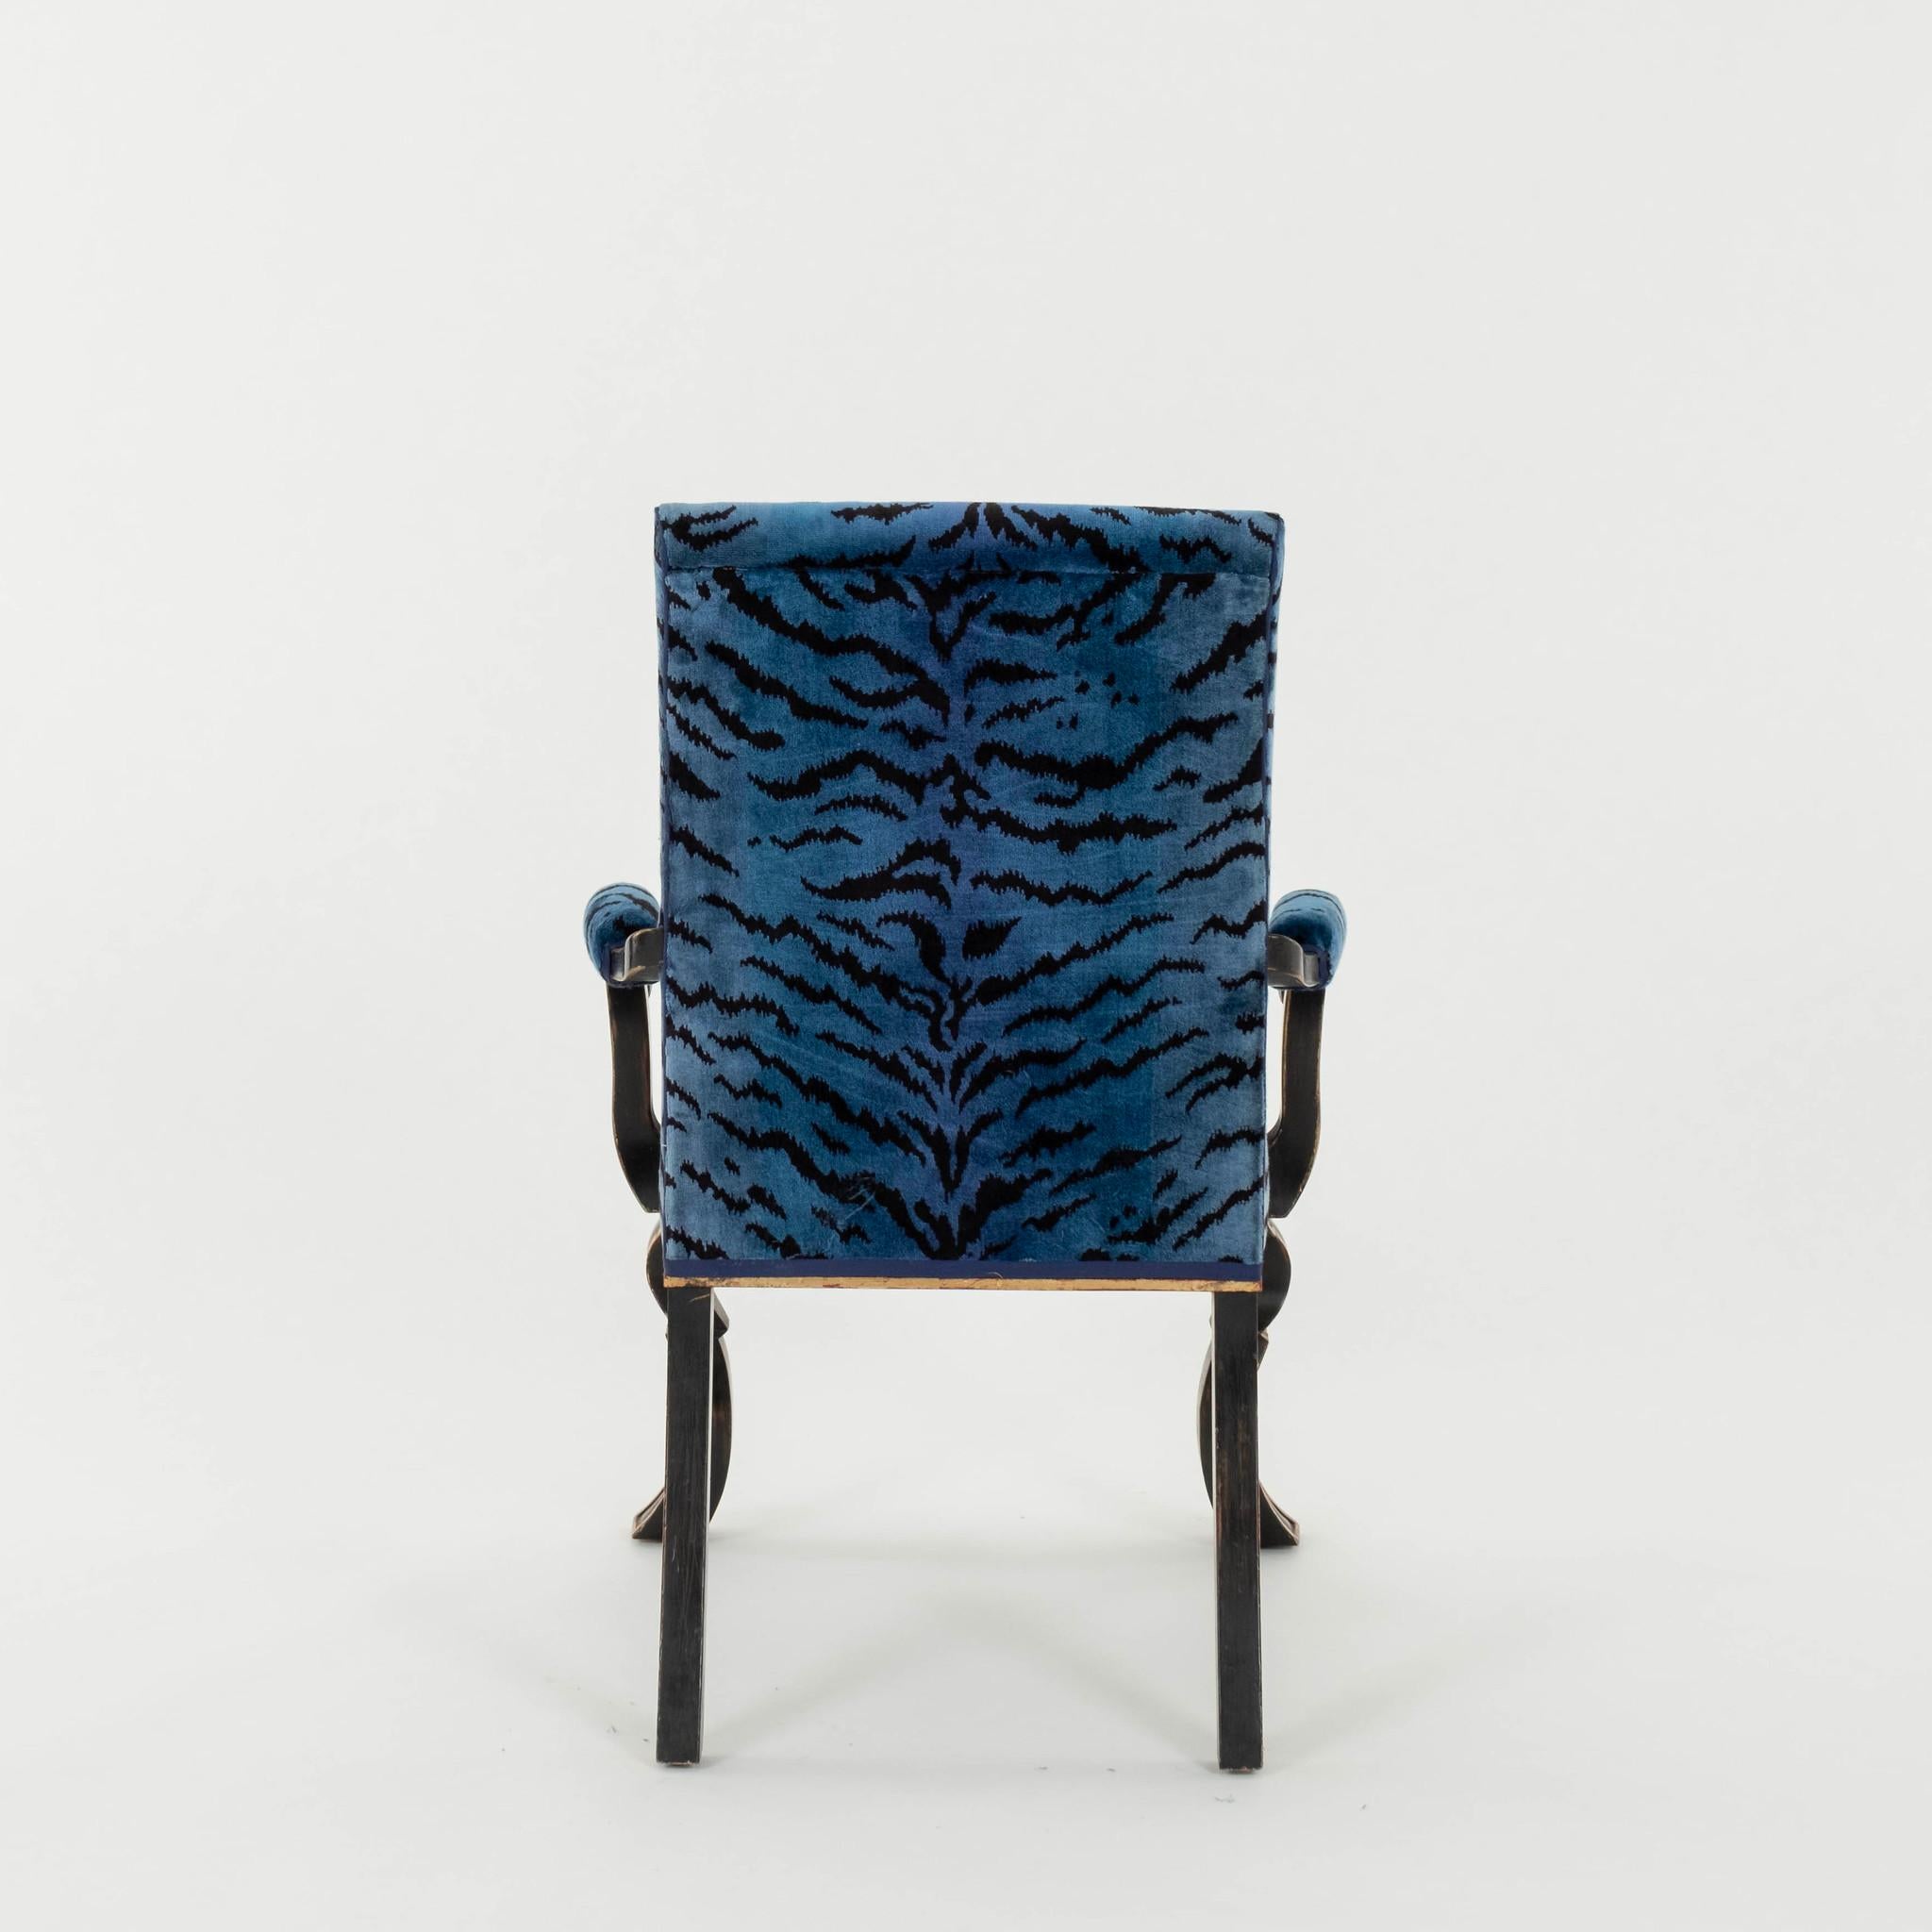 Rose Tarlow Melrose House Puccini Blue Scalamandré Tigre Velvet Armchair(s) In Good Condition For Sale In Houston, TX